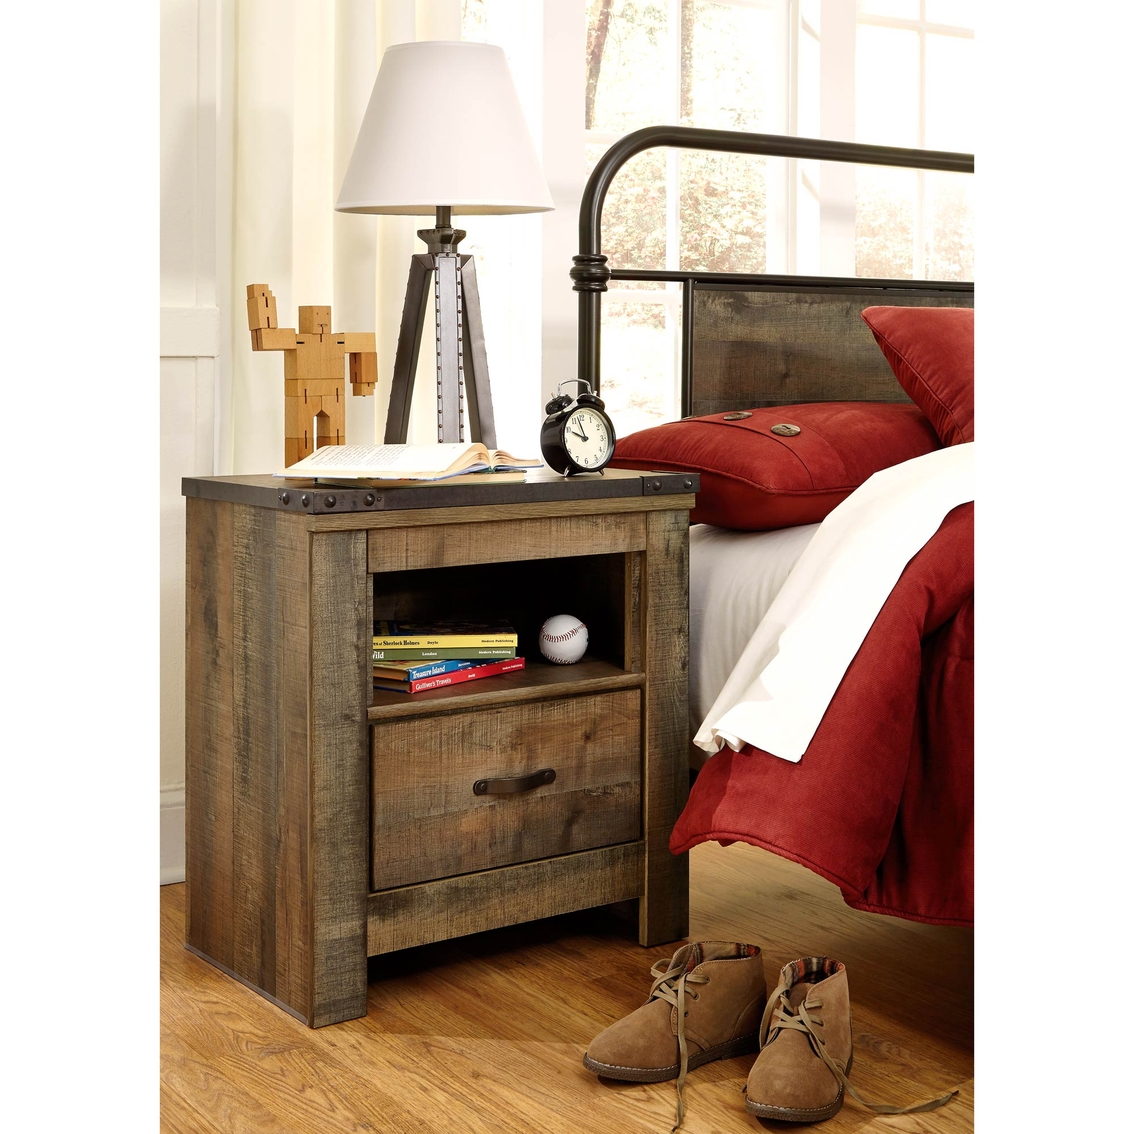 Ashley Trinell 1 Drawer Nightstand - Image 2 of 4